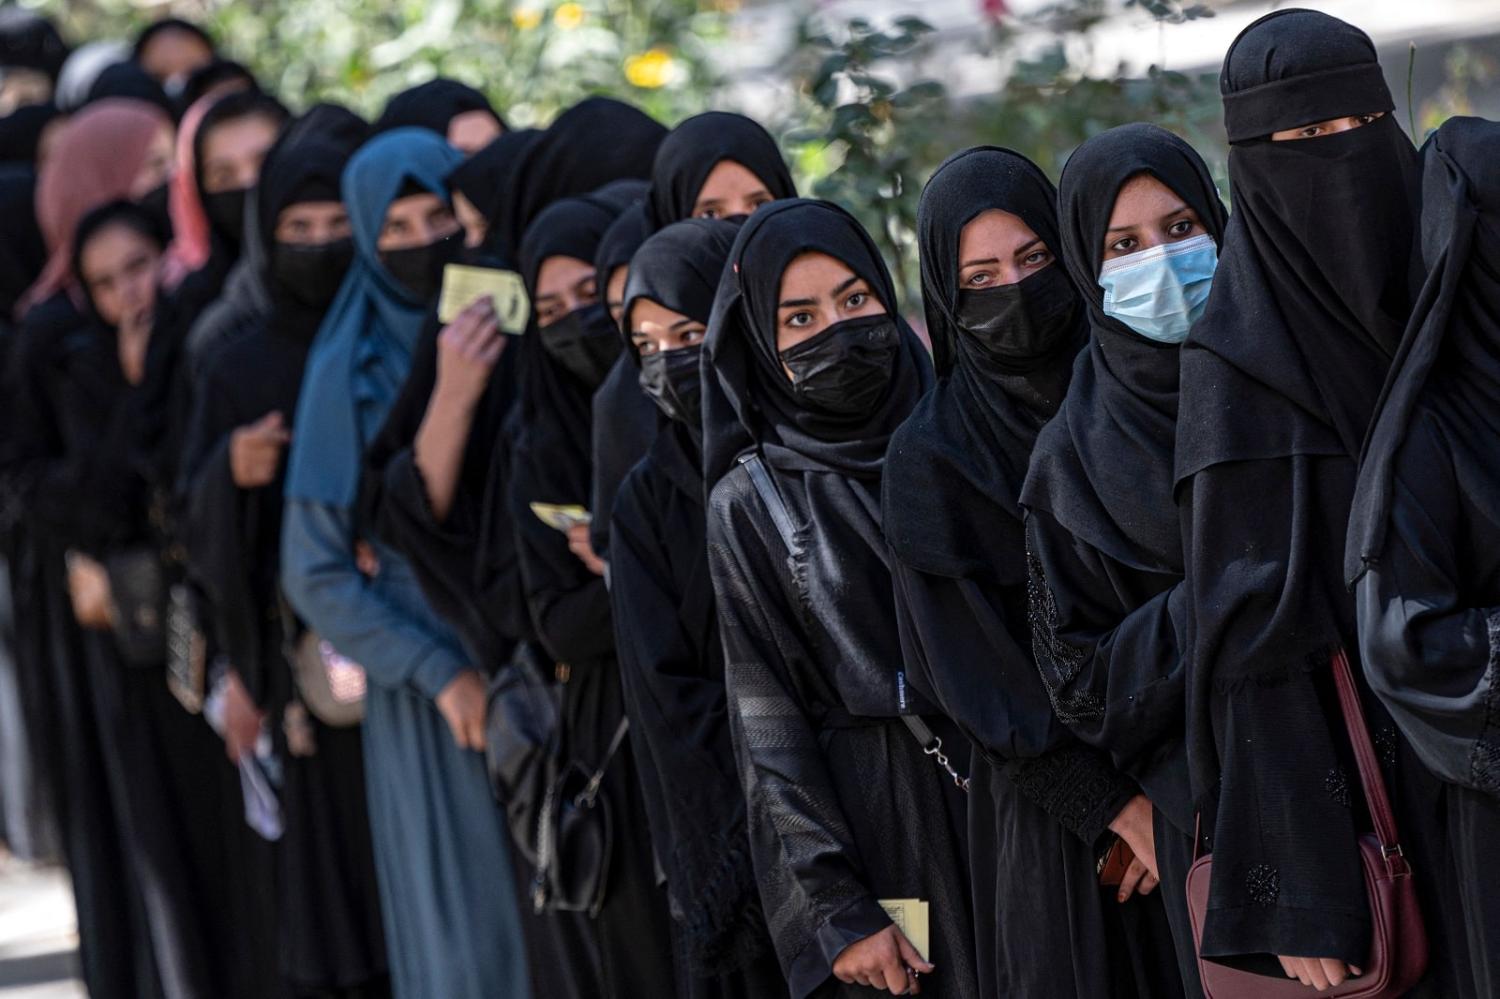 Afghan female students queue for entrance exams at Kabul University on 13 October 2022. One week later, the Taliban banned all women from university "until further notice" (Wakil Kohsar/AFP via Getty Images)